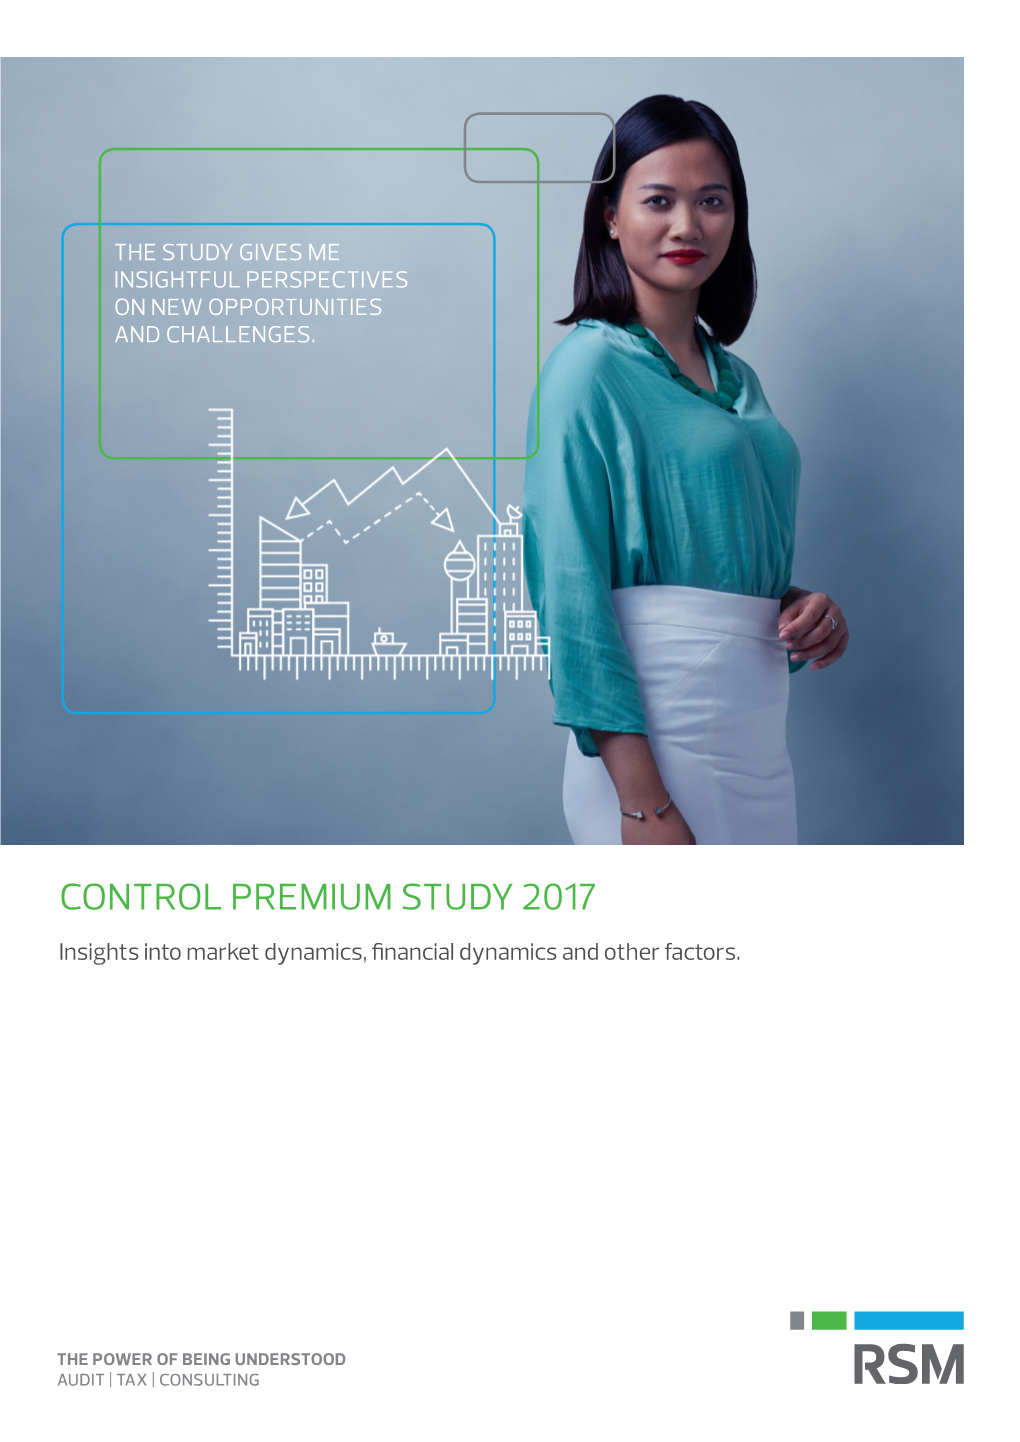 CONTROL PREMIUM STUDY 2017 Insights Into Market Dynamics, Financial Dynamics and Other Factors